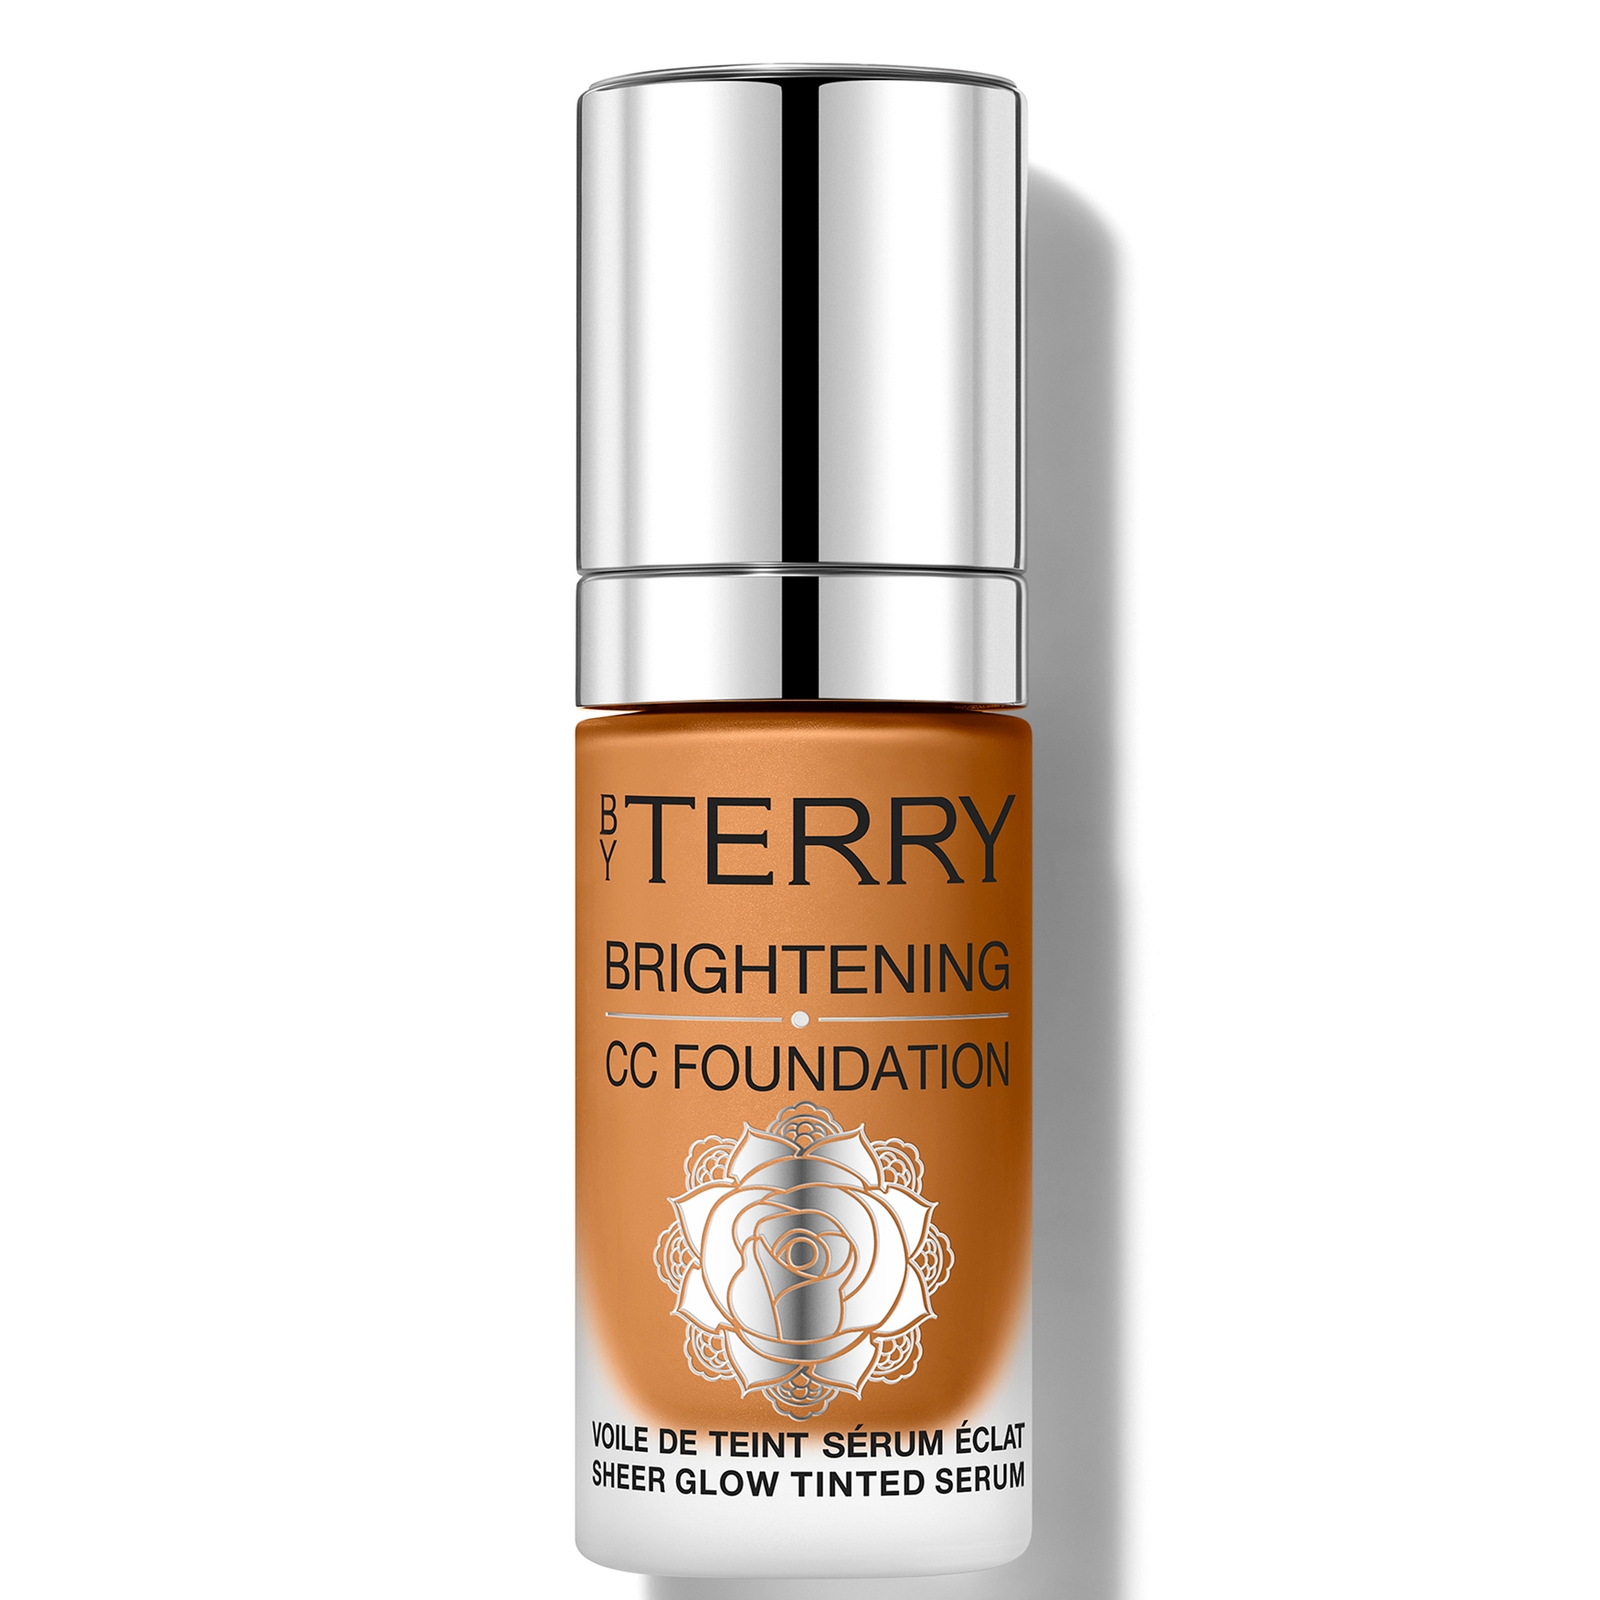 Image of By Terry Brightening CC Foundation 30ml (Various Shades) - 7C - MEDIUM DEEP COOL